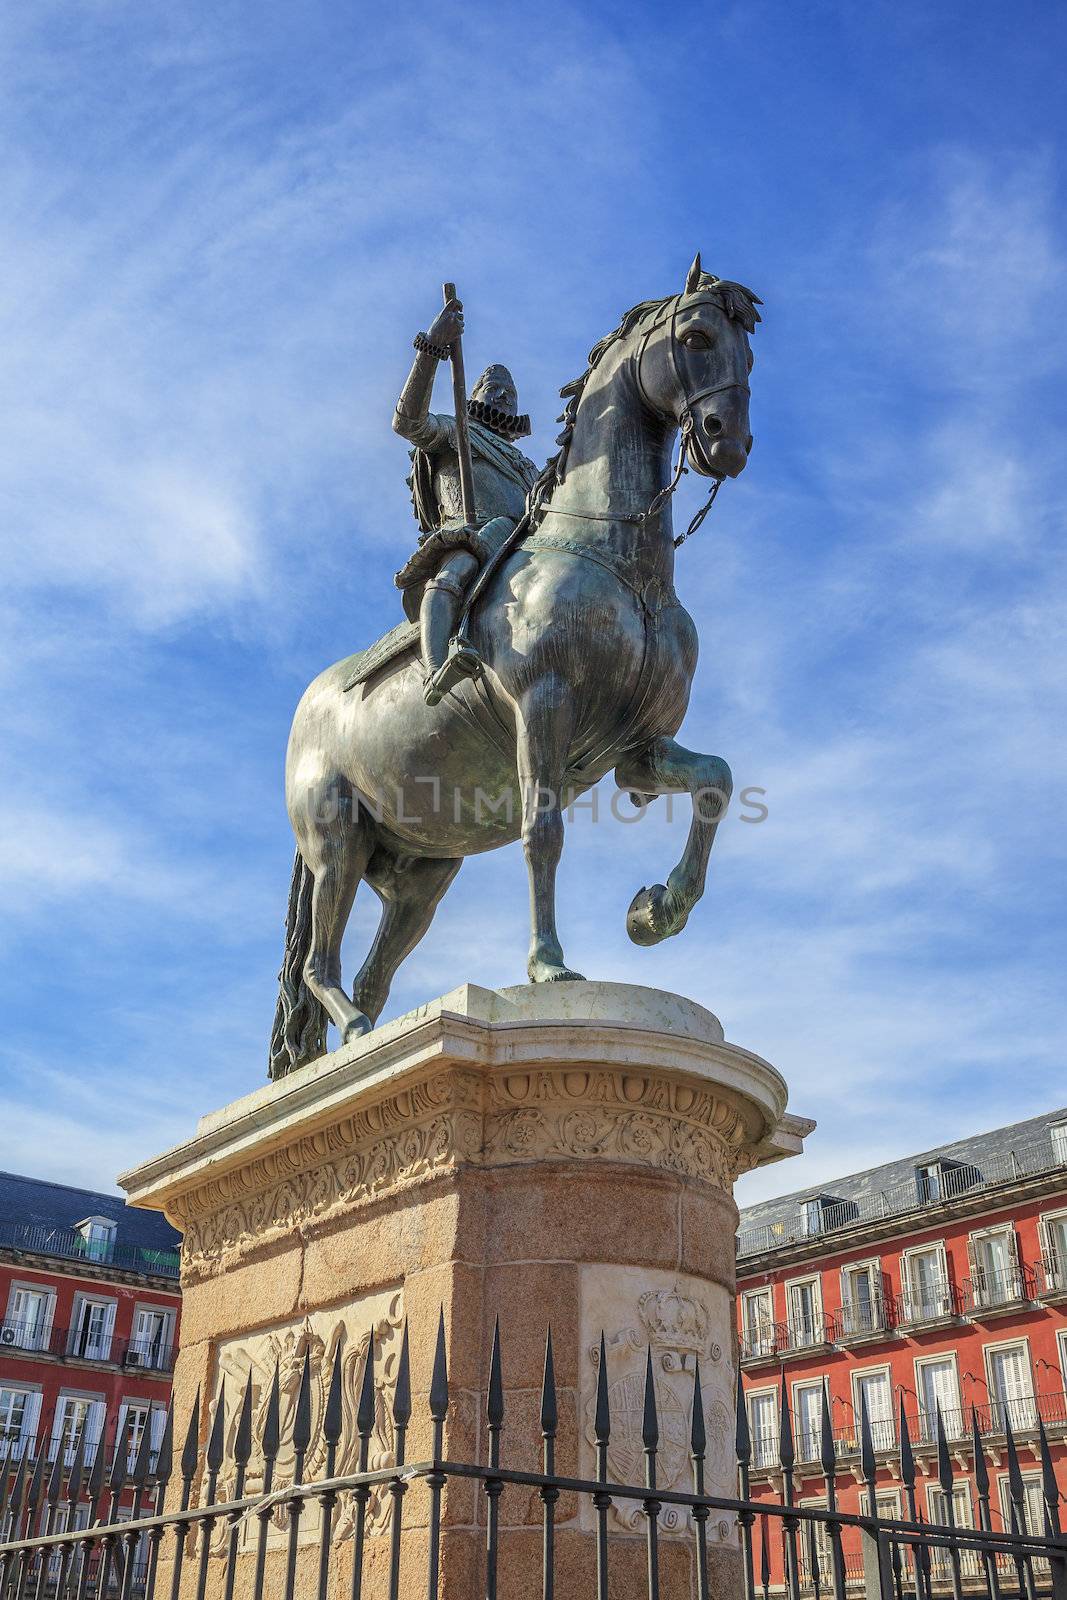 The monument of the King Philip III on Plaza Mayor in Madrid, Spain